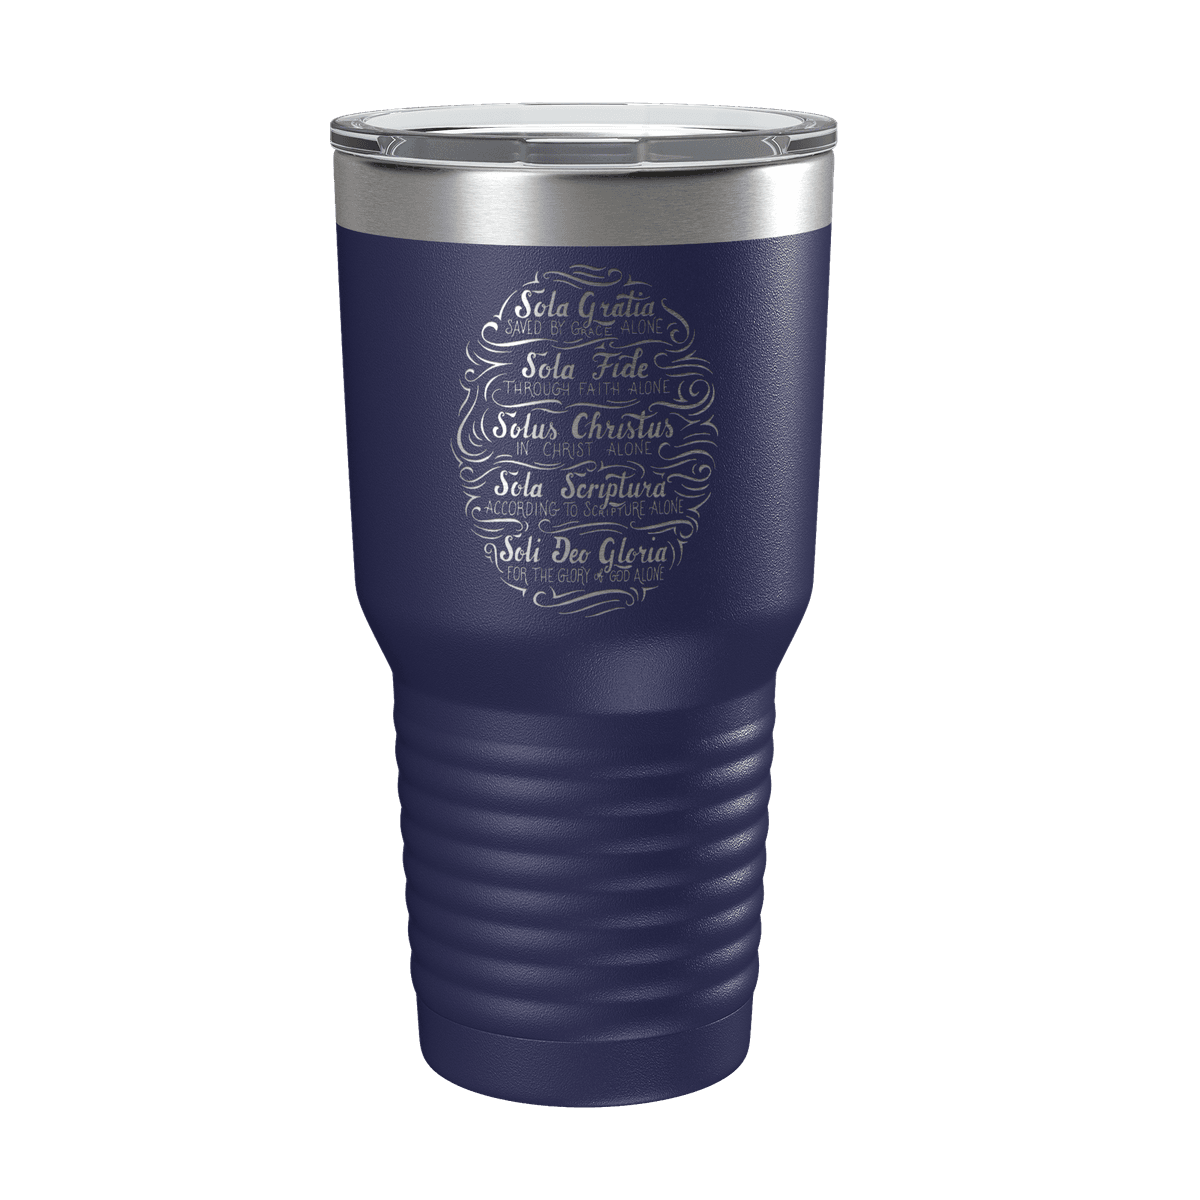 https://d11xh0uby8avni.cloudfront.net/fit-in/0x1200/products/SOLA09-tumbler30-navy.png